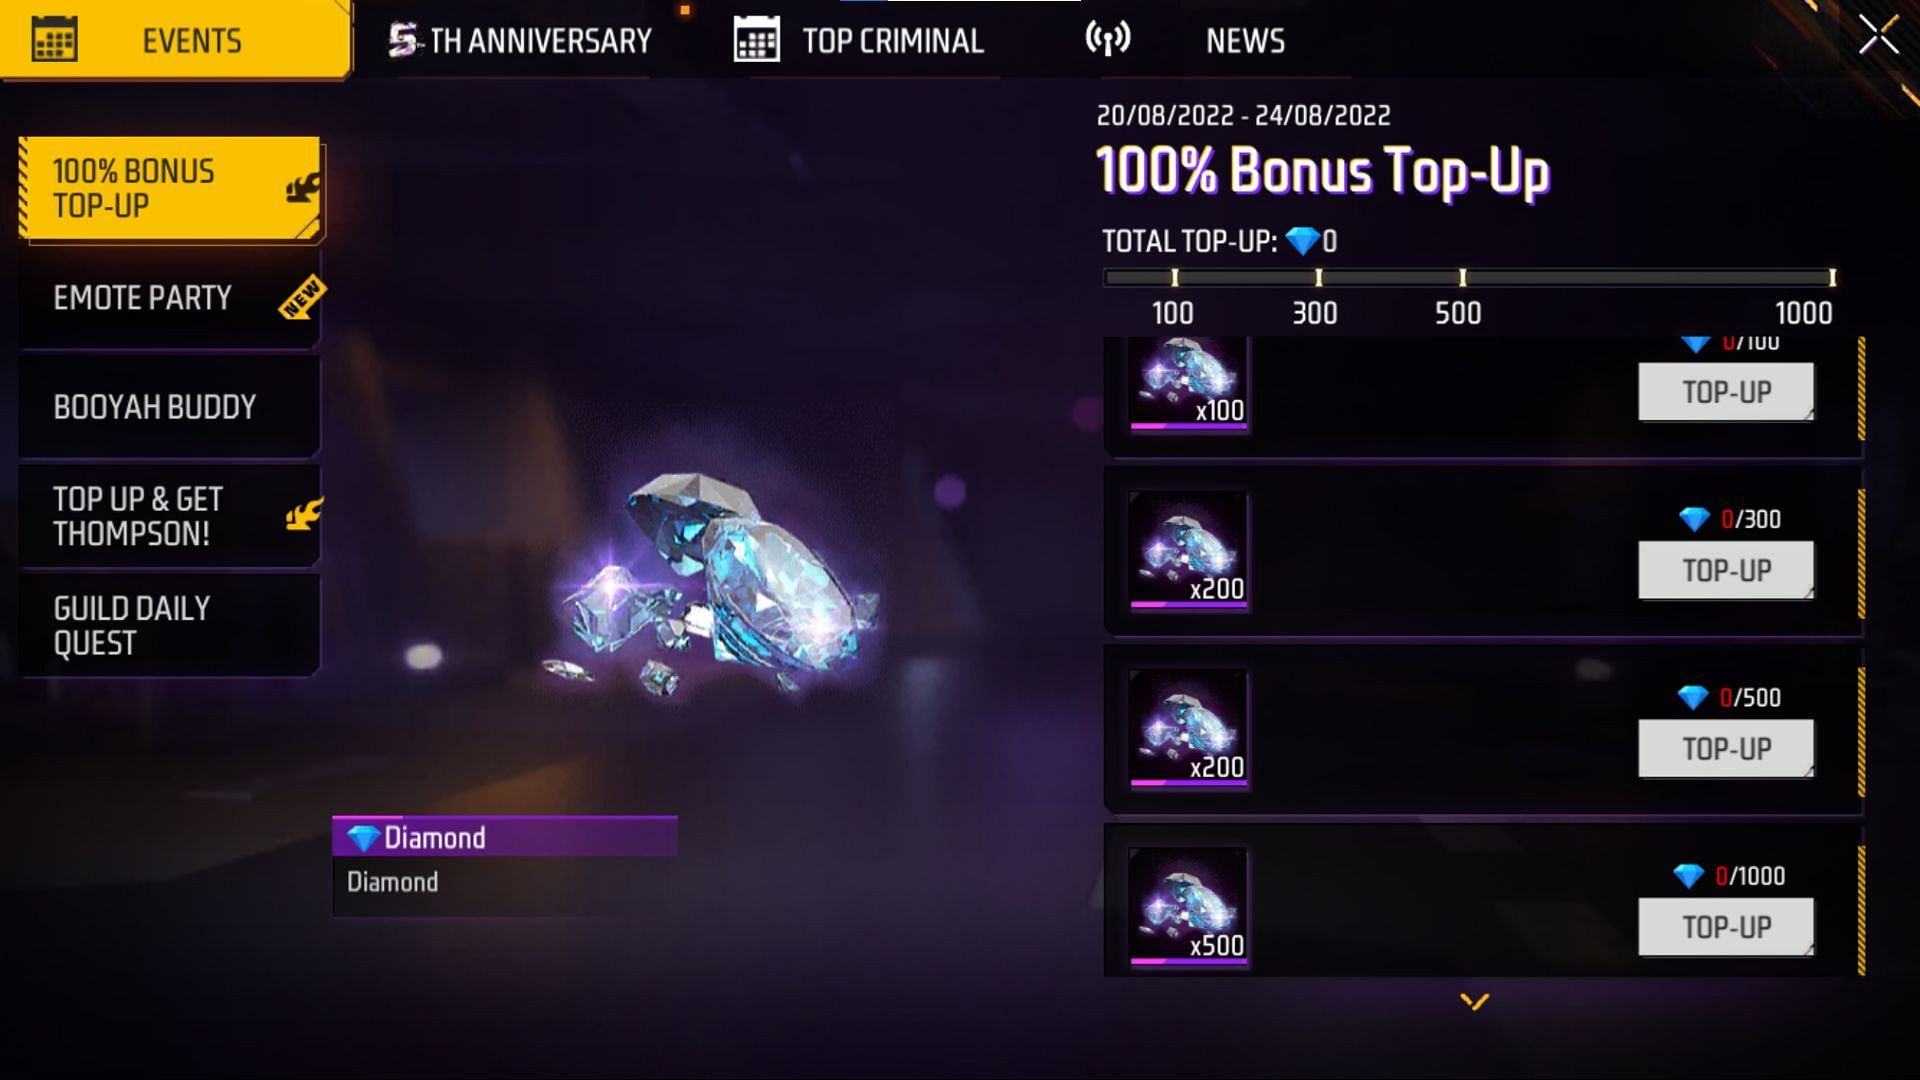 Players will have to click on the &#039;Claim&#039; button to obtain the rewards of the 100% Bonus Top-Up event (Image via Garena)